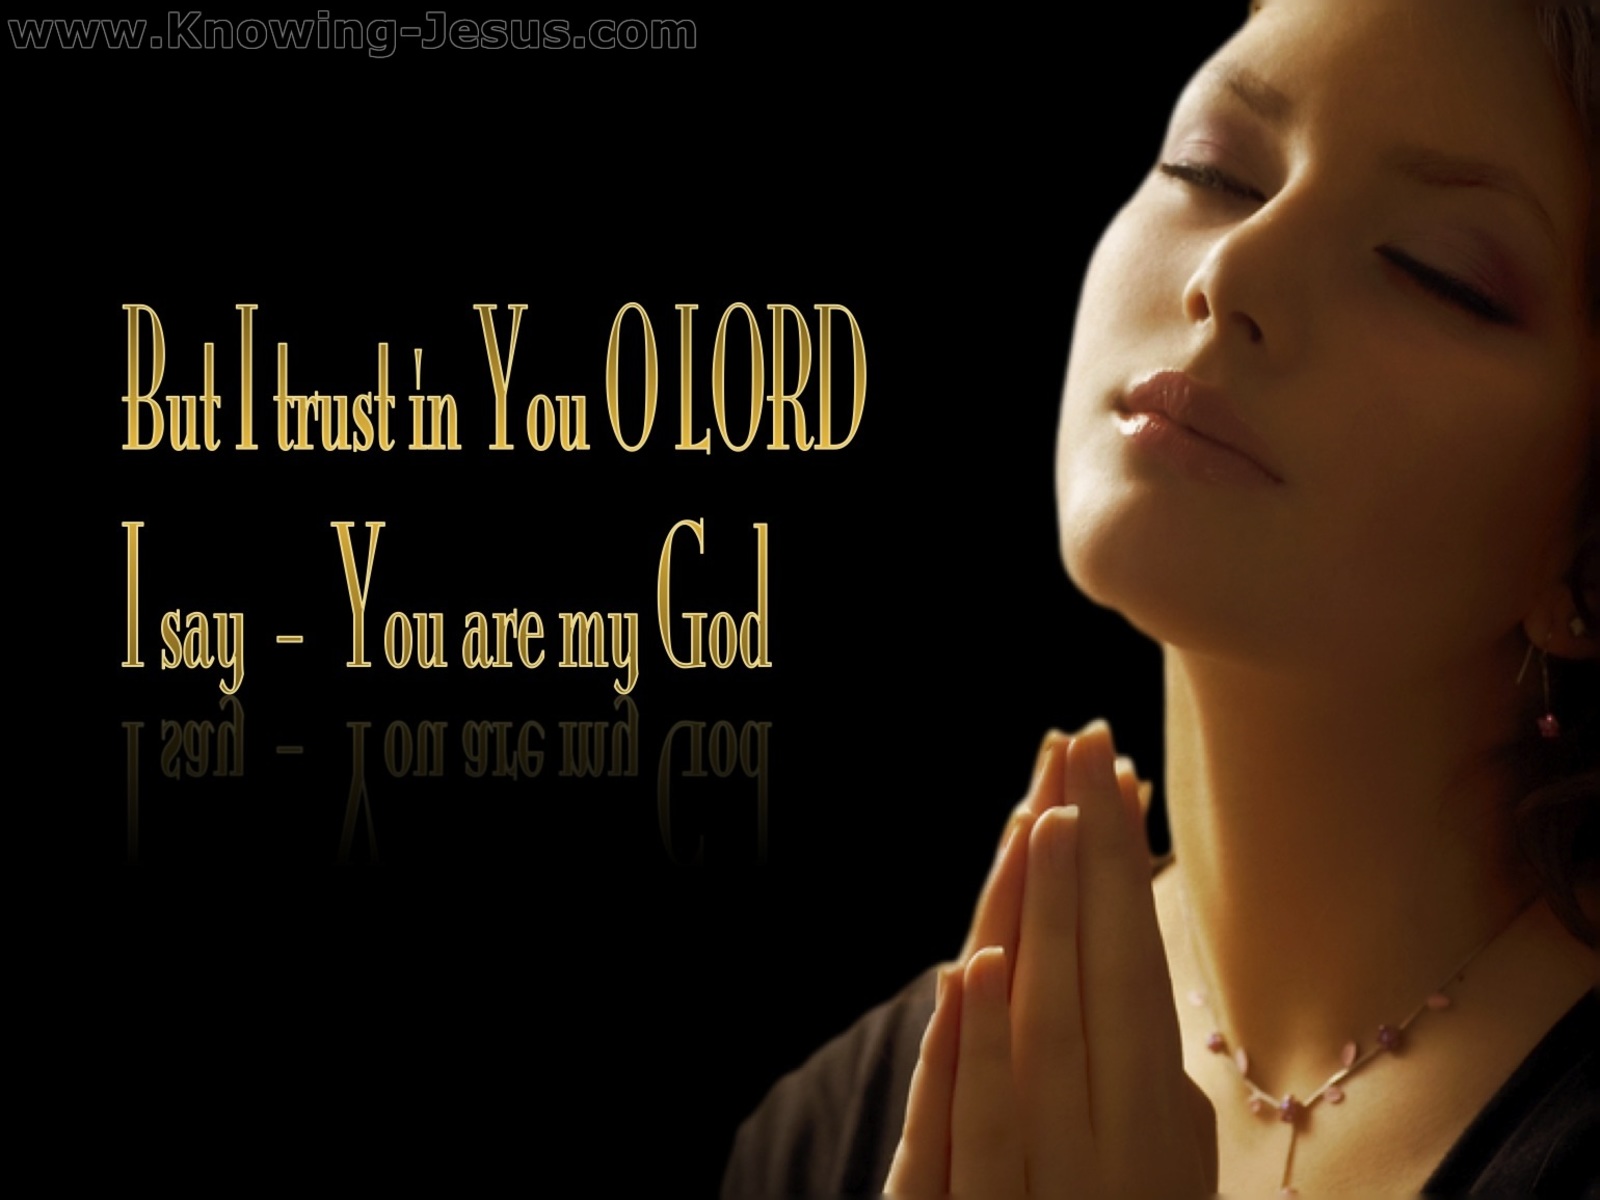 Psalm 31:14 But I Trust in You O Lord (black)